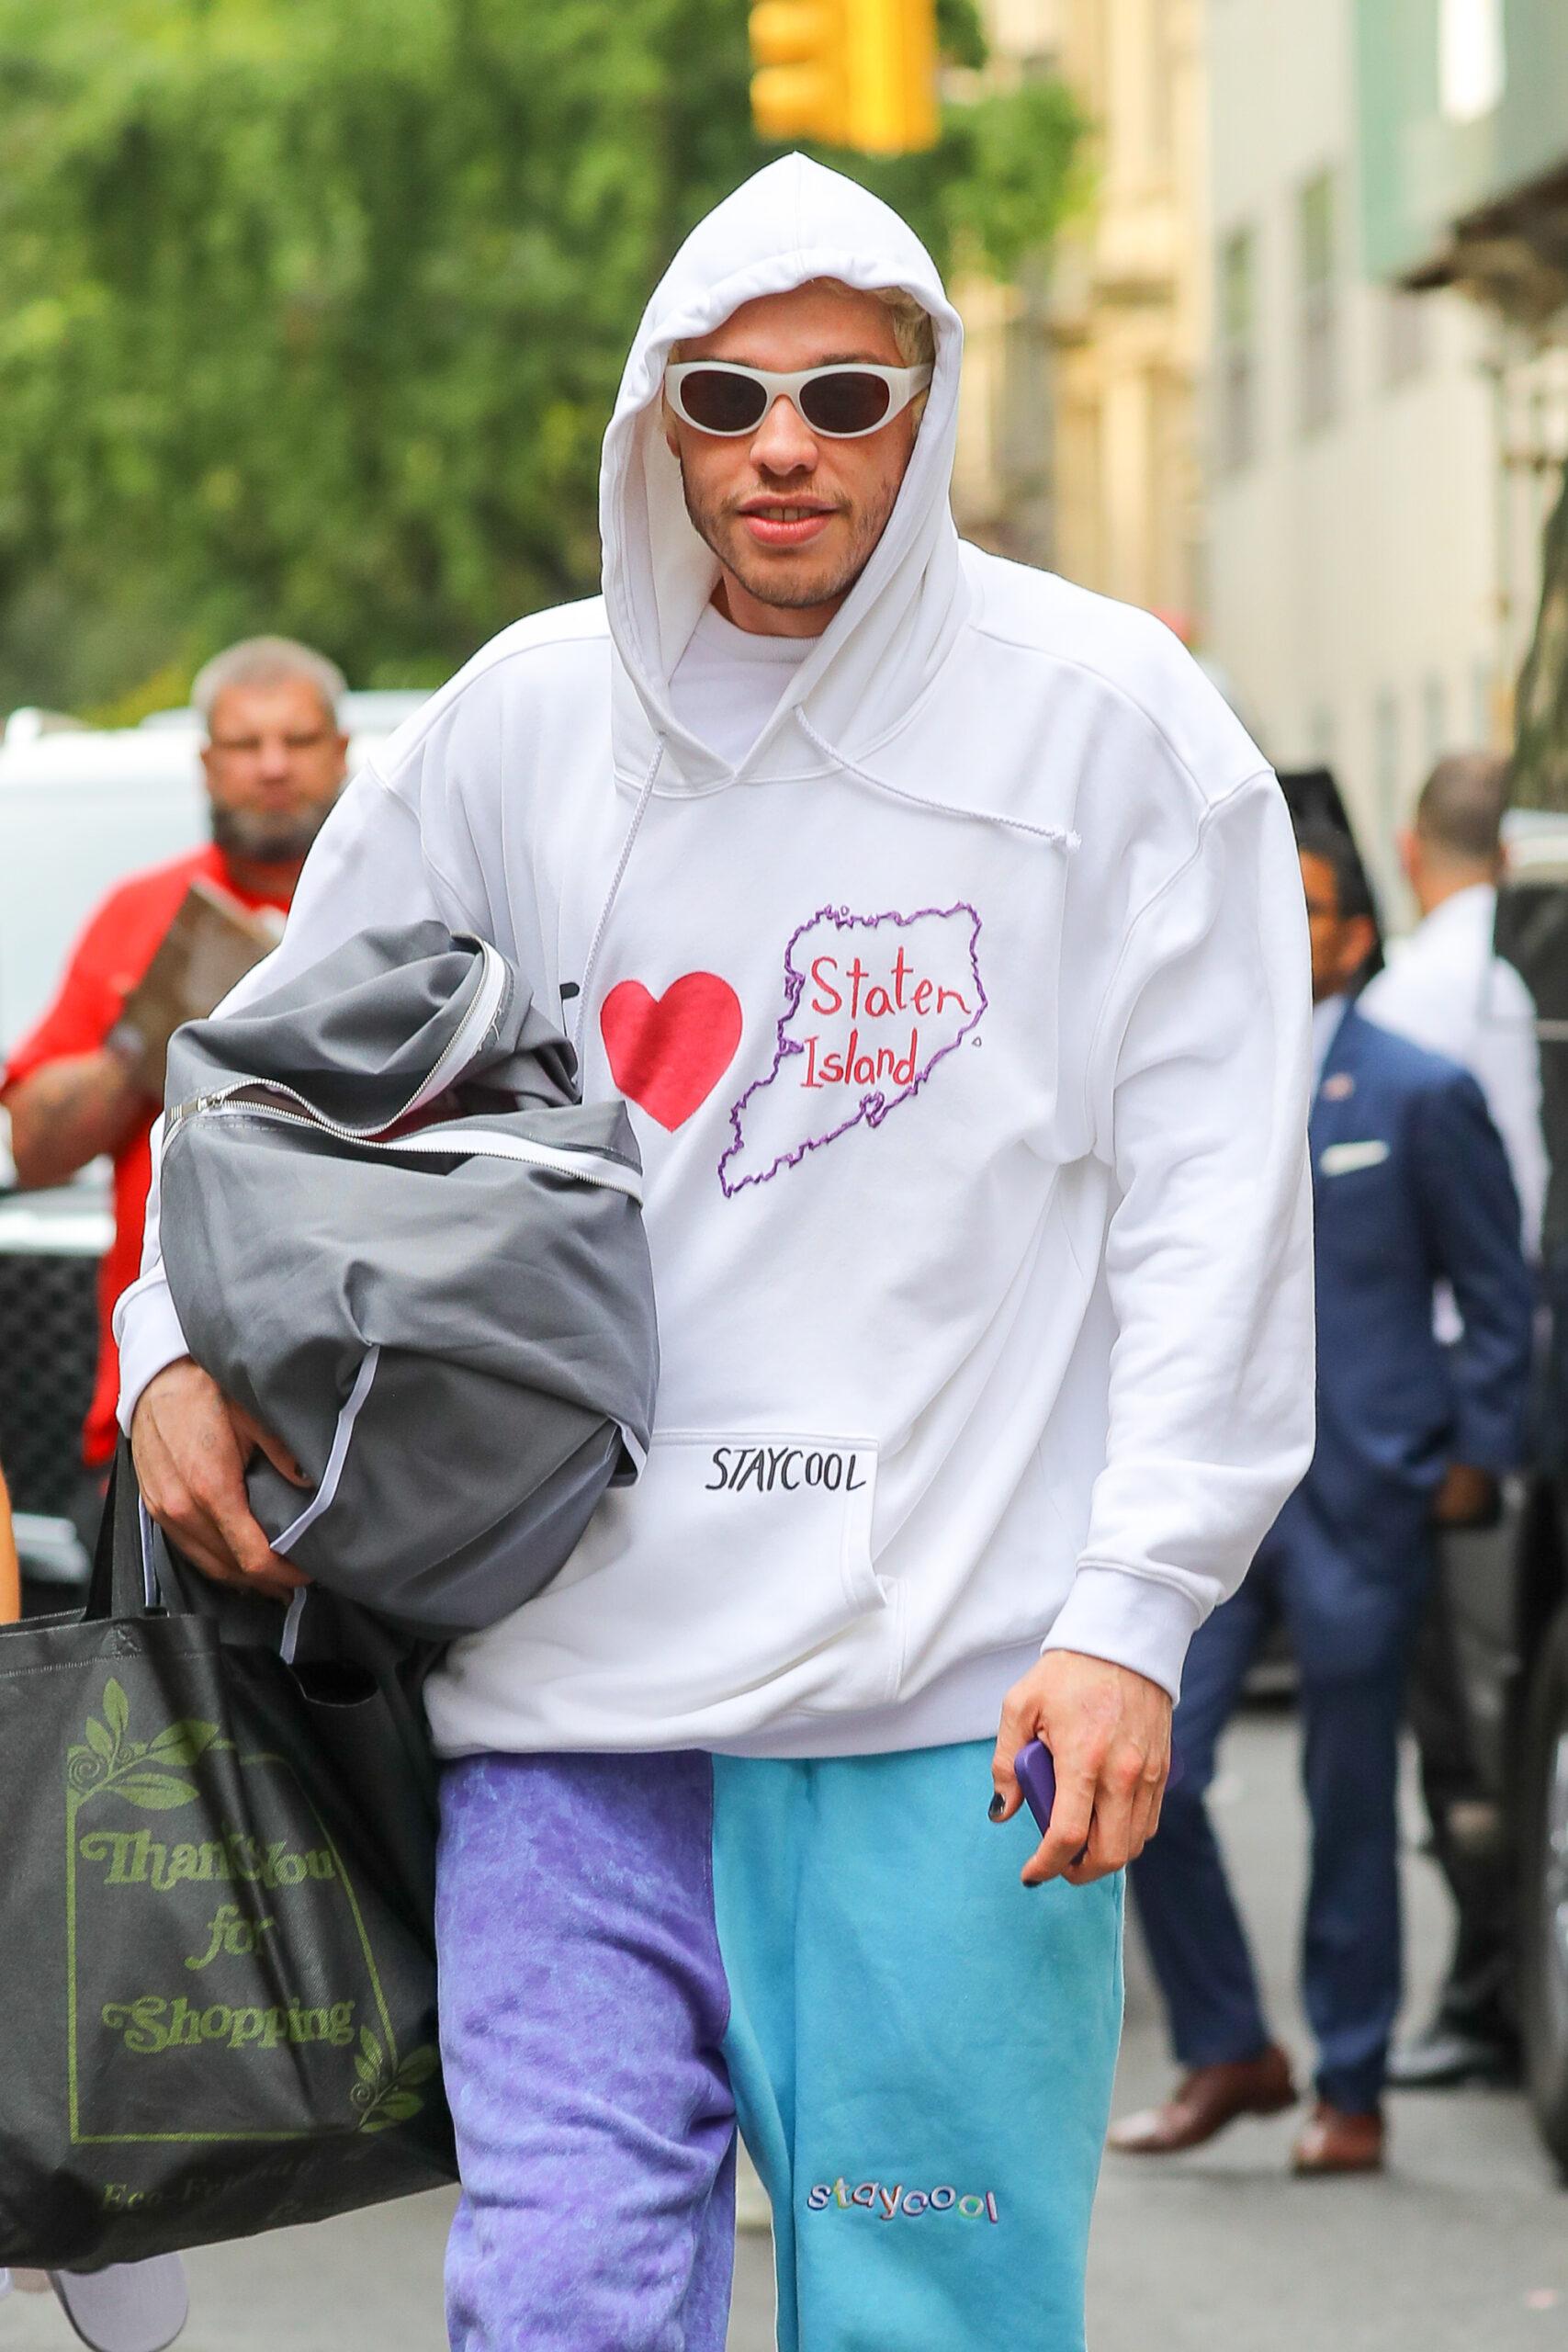 Pete Davidson spotted taking a picture with a fan as he leaves The Carlyle Hotel in NYC